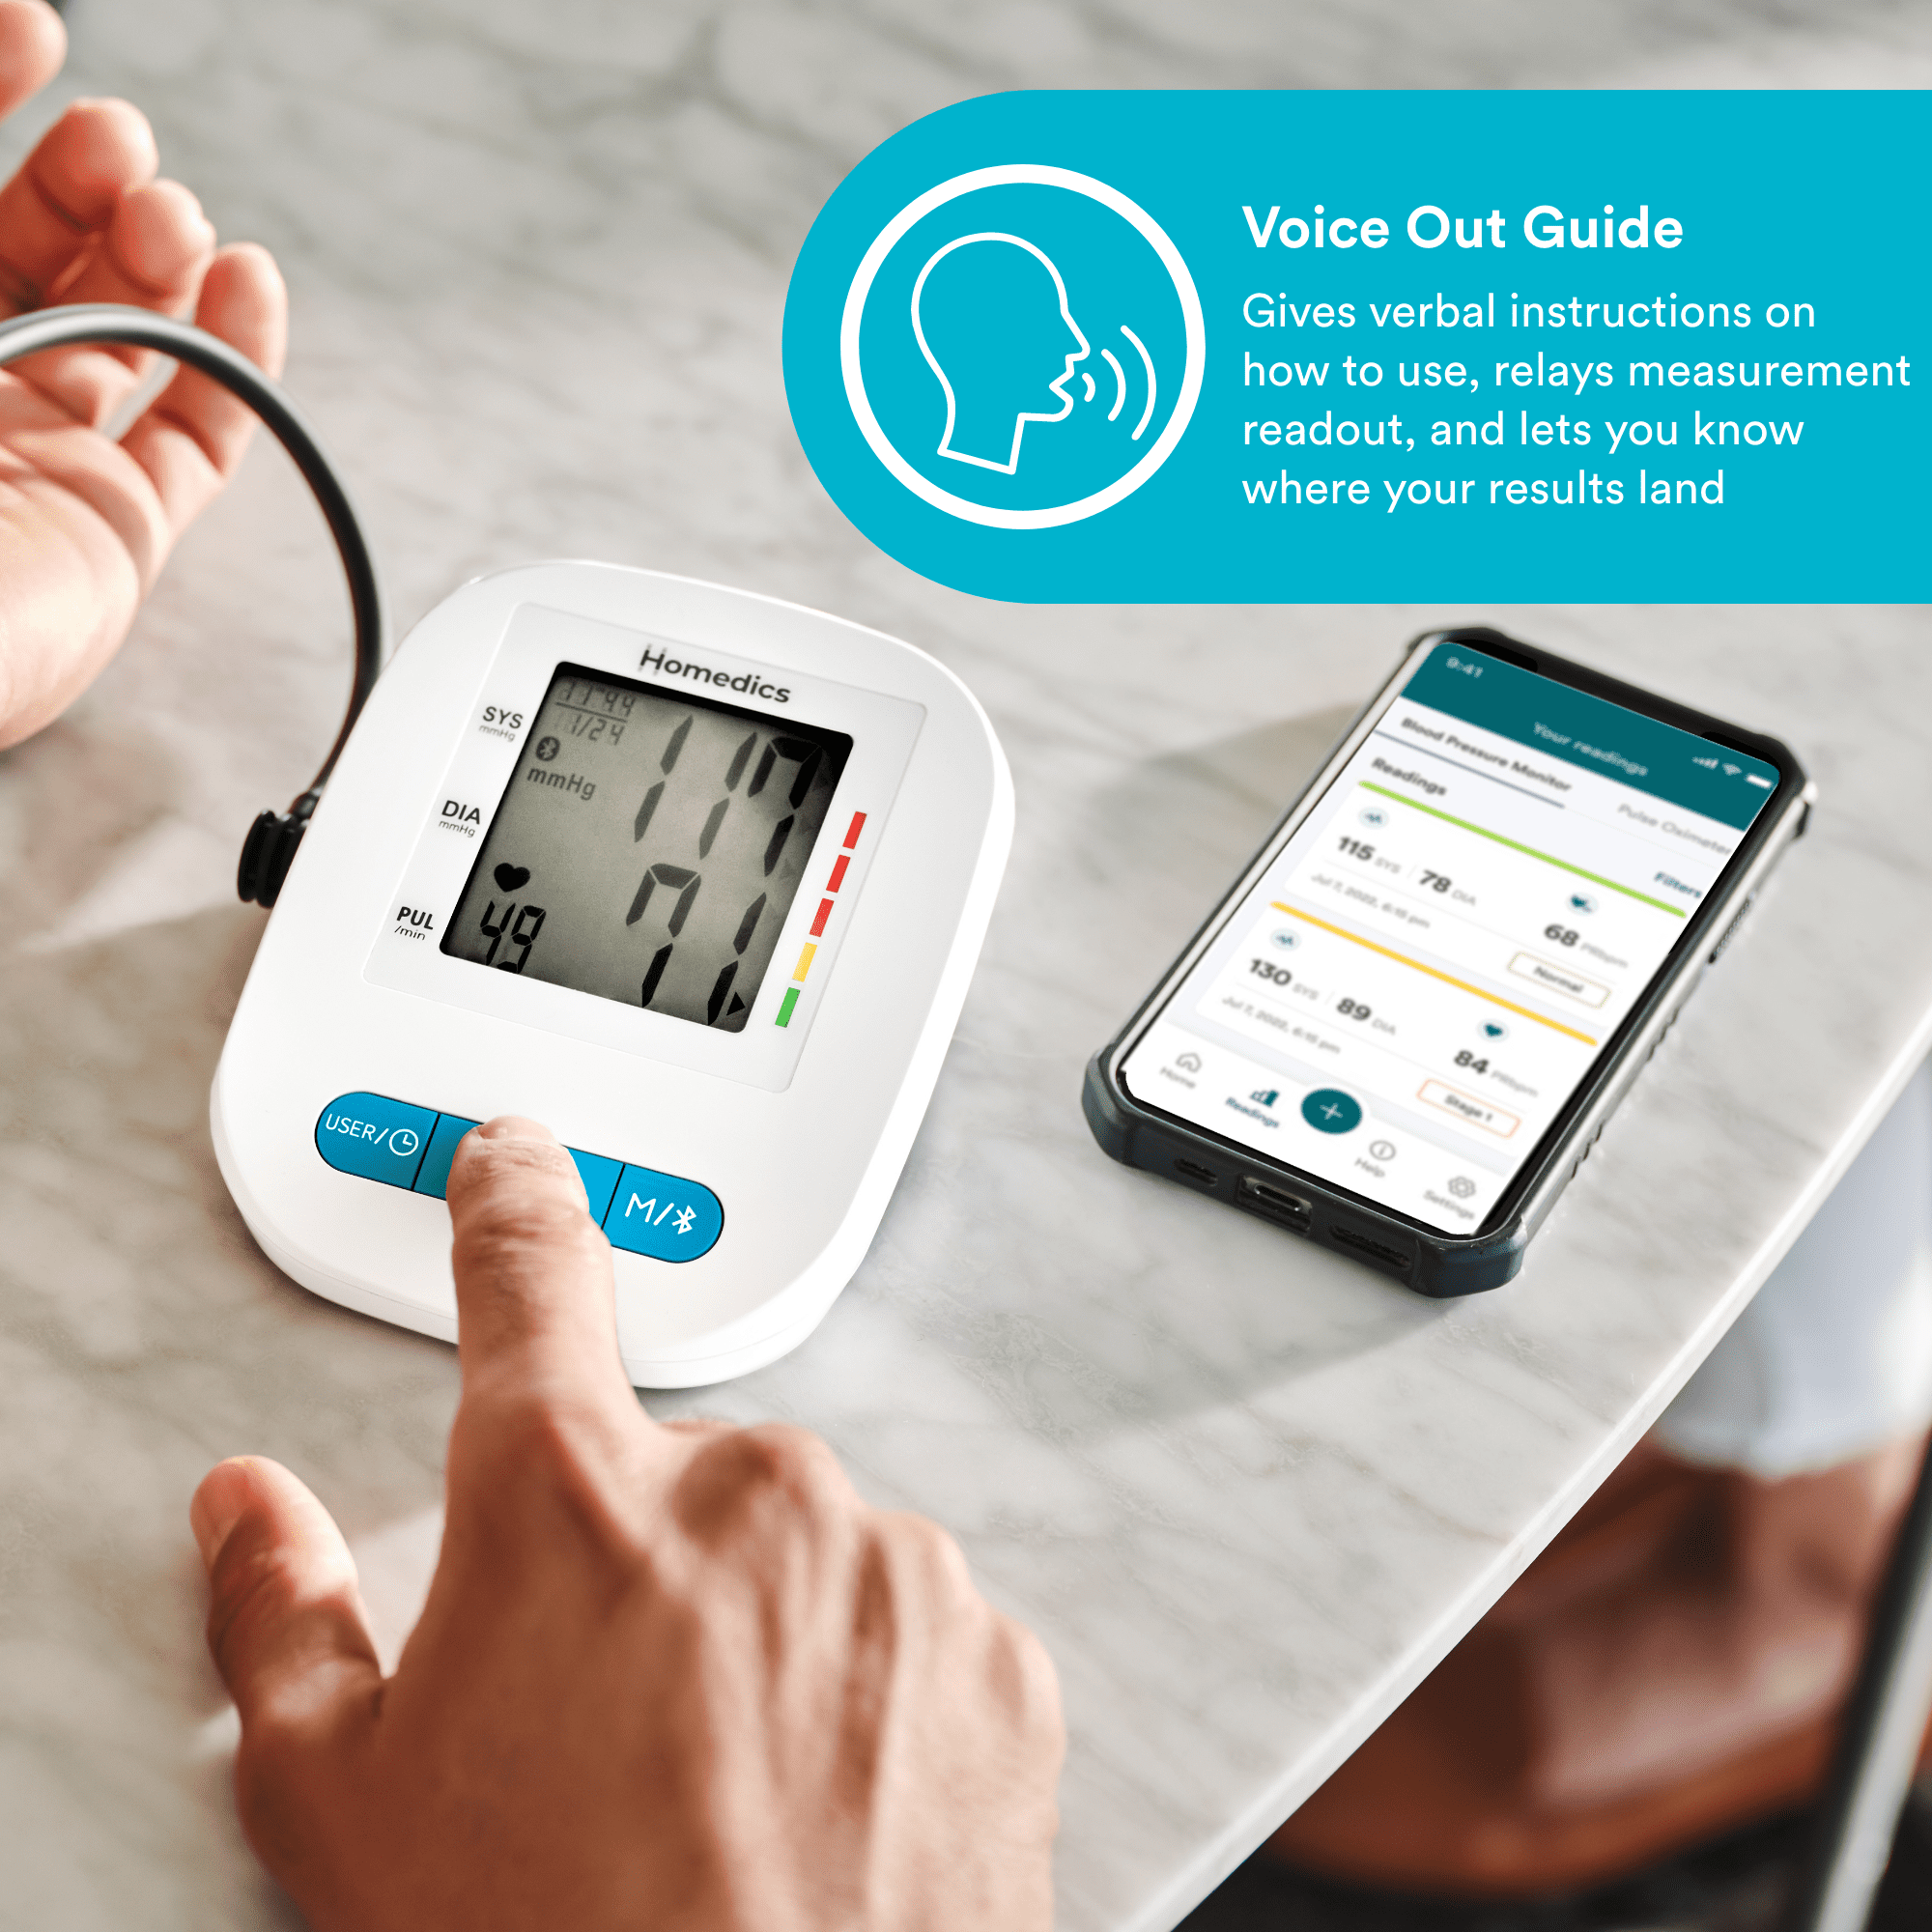 Available at Walmart, The Homedics Blood Pressure Monitor does it all! Not  only is it accurate, but it's also portable and easy to use. Our Smart  Measure Technology ensures